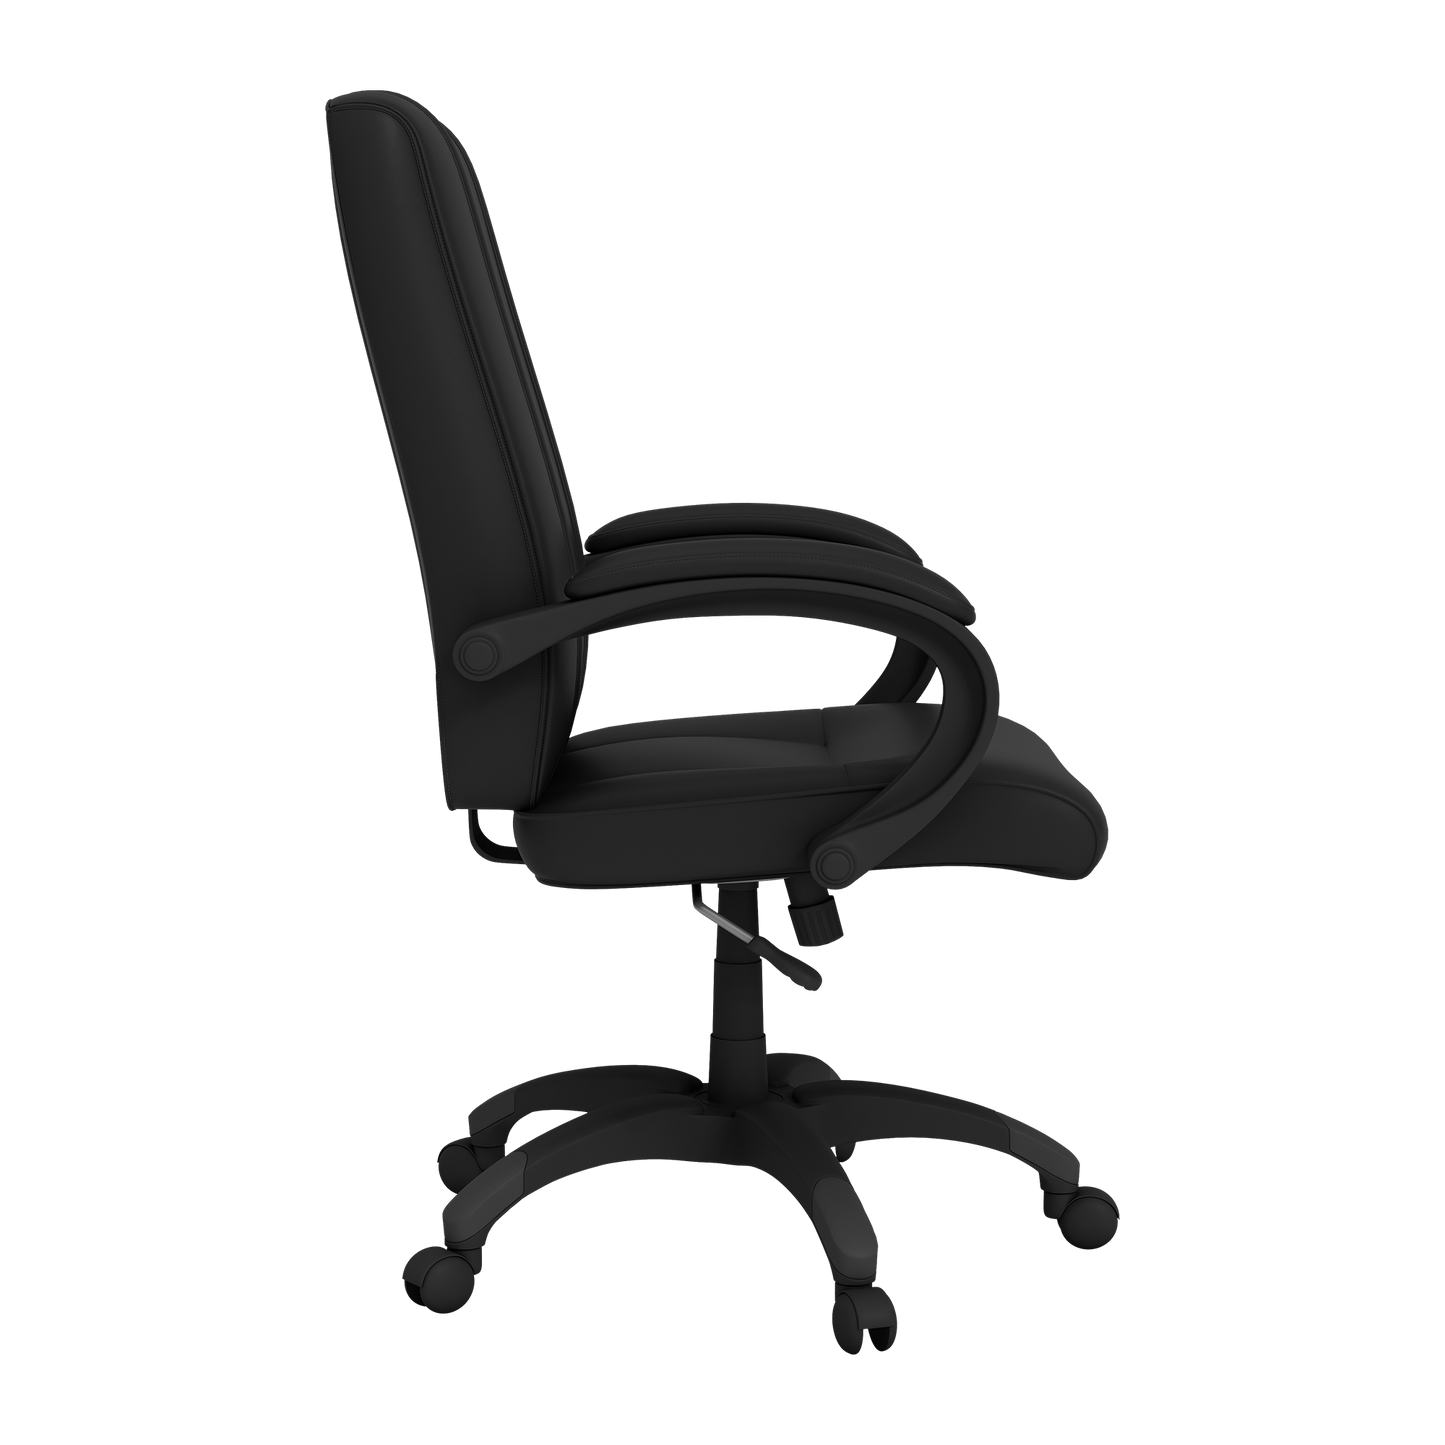 Office Chair 1000 with Tampa University Primary Logo